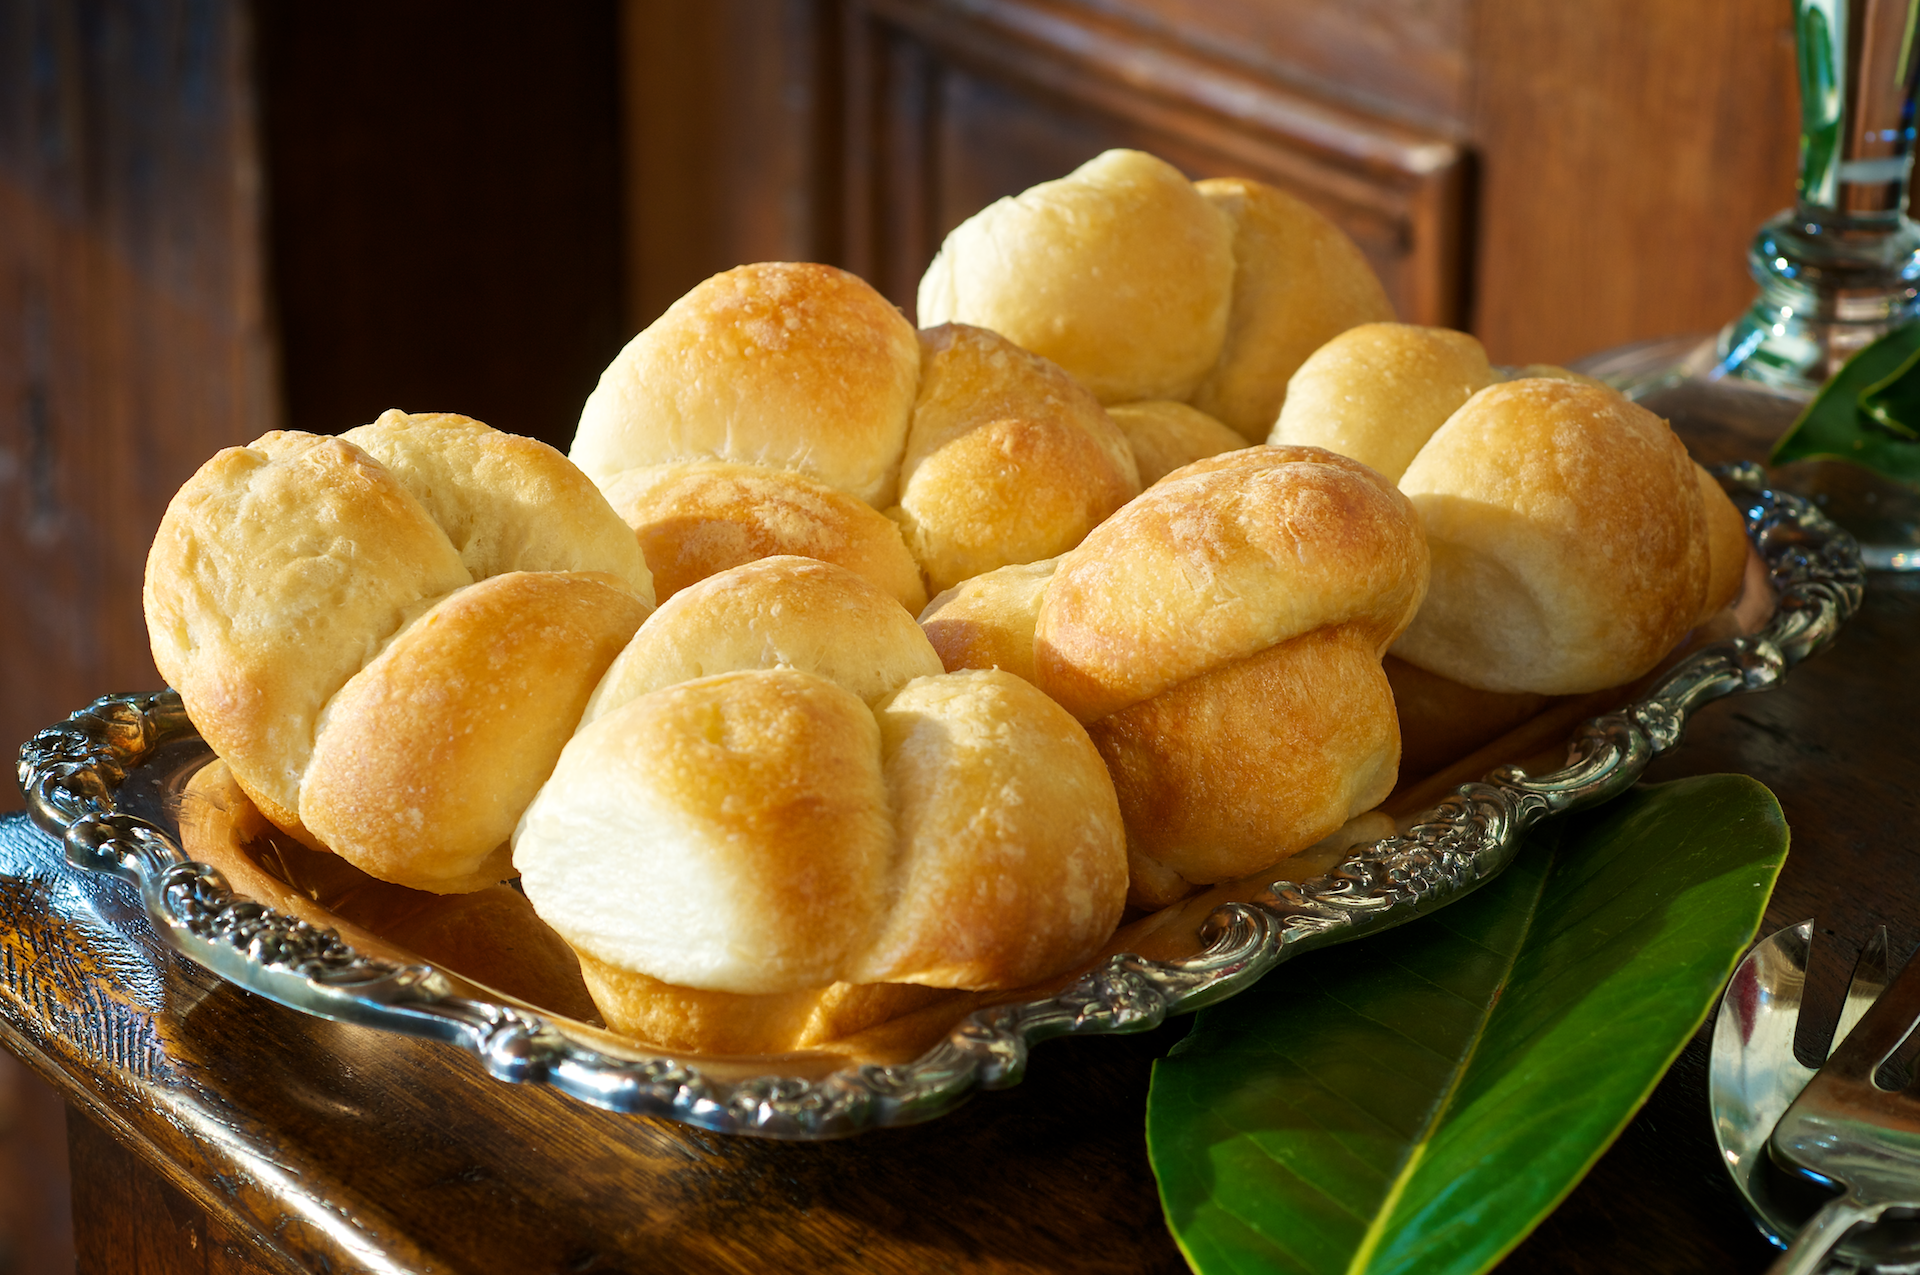 Buttery pull-apart rolls served fresh-baked hot from the oven! Pair these with the honey butter recipe below and you've got a beautiful presentation of dinner rolls.